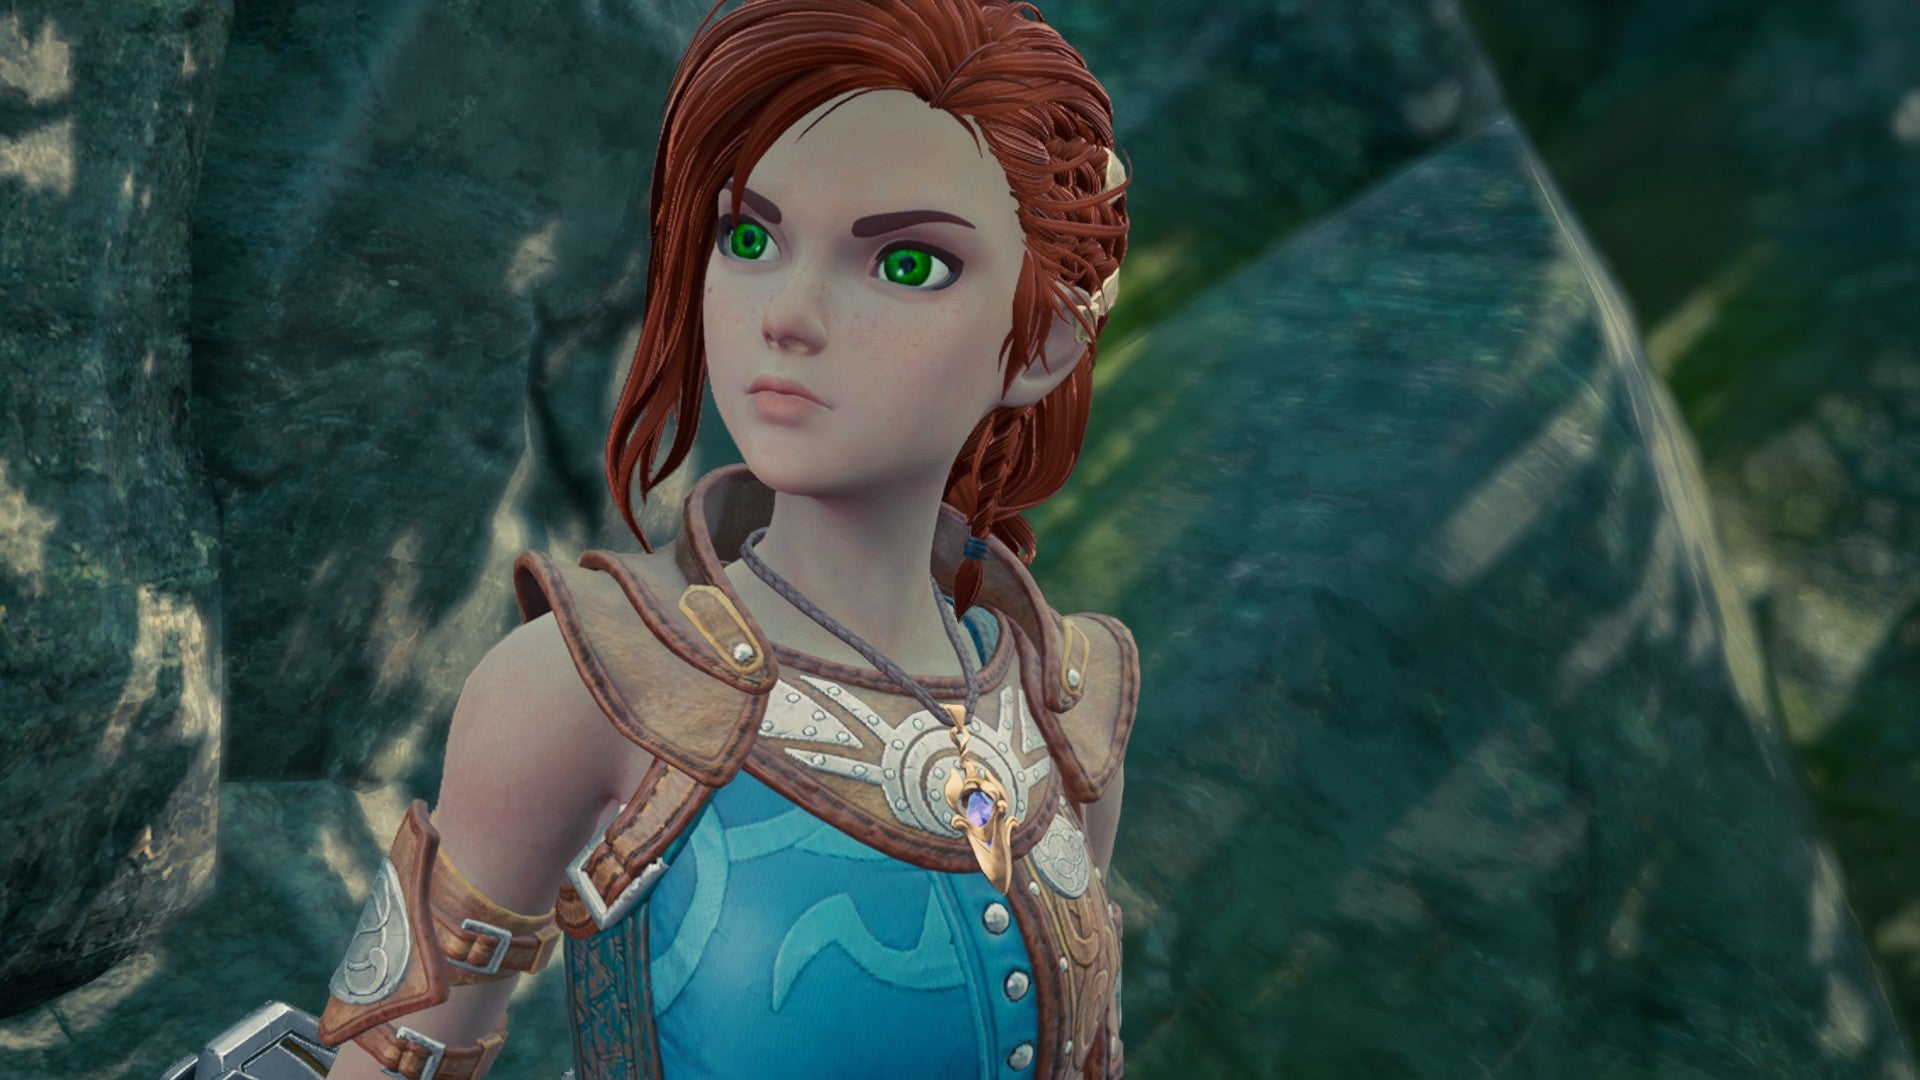 The player character in Asterigos, a red headed, green eyed elfin sort of a person